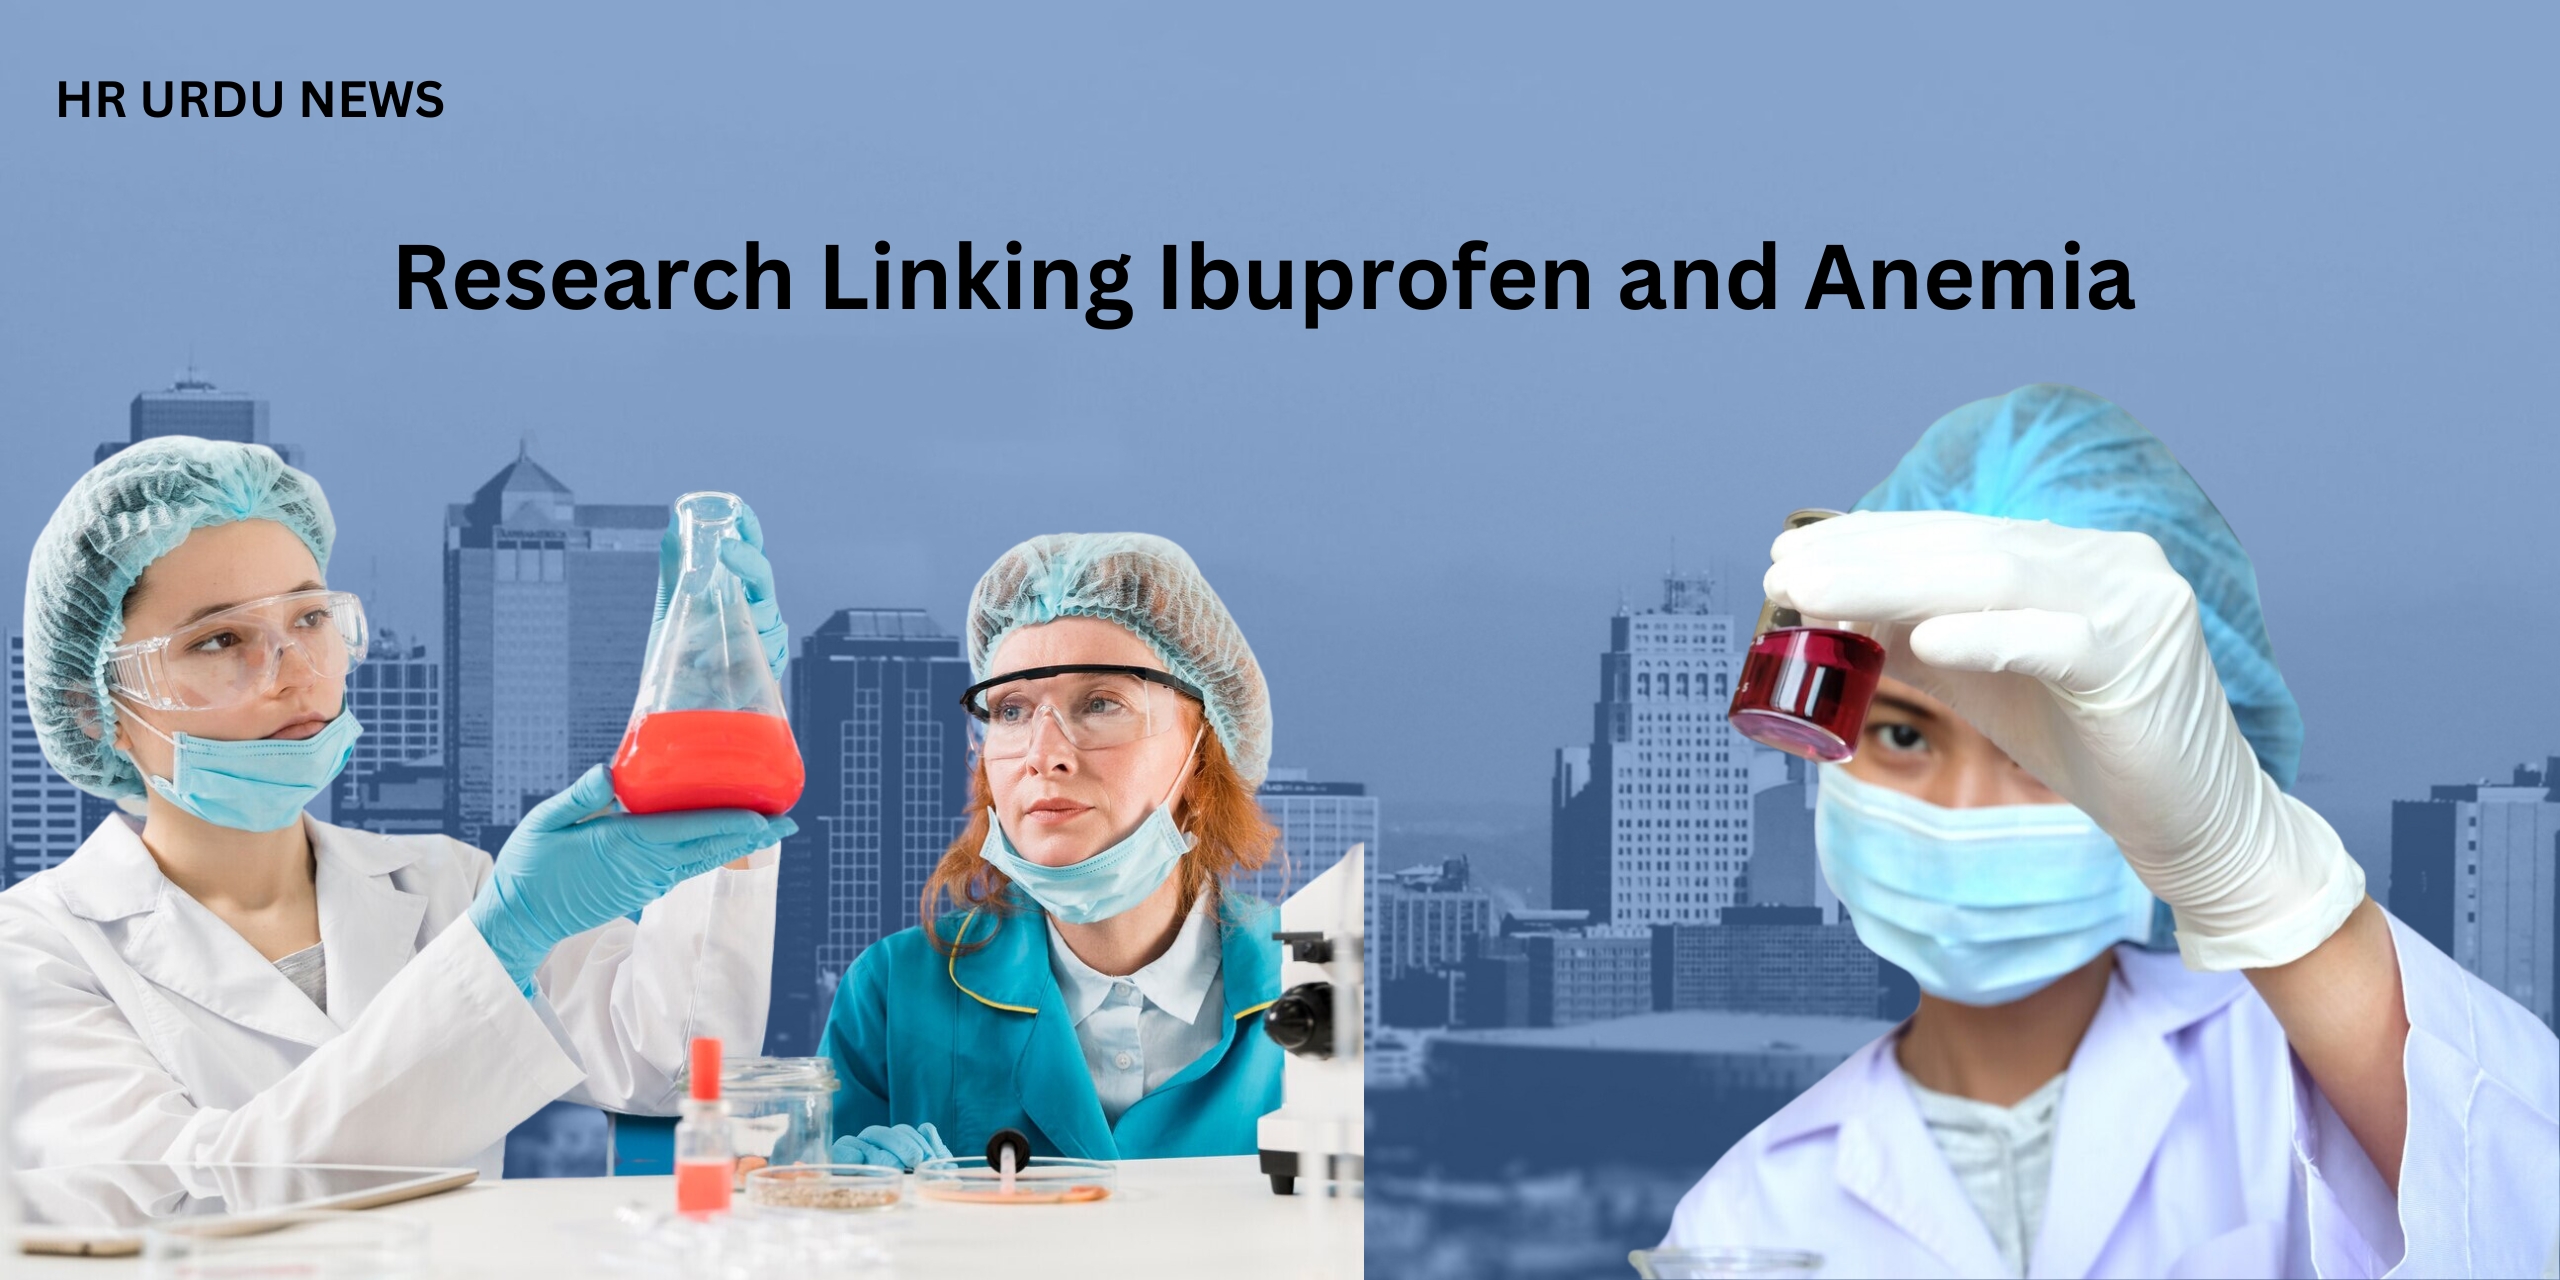 Research Linking Ibuprofen and Anemia